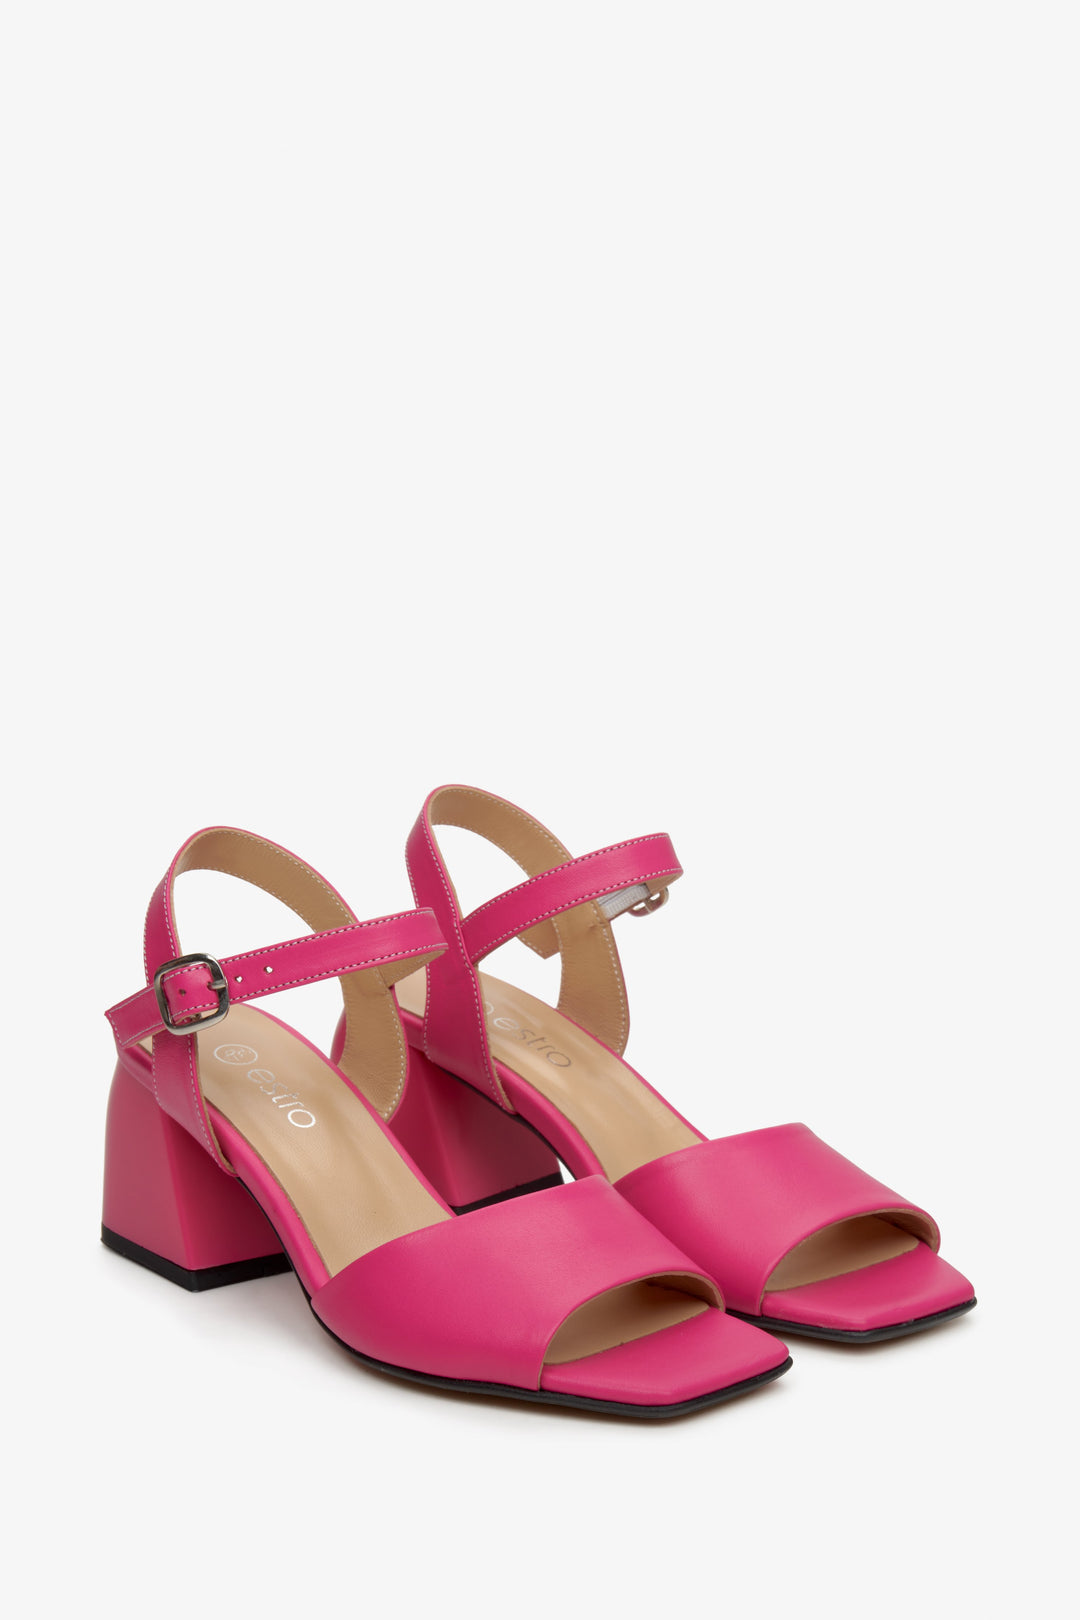 Women's pink sandals made of genuine leather by Estro - presentation of shoe seams and toe cap.